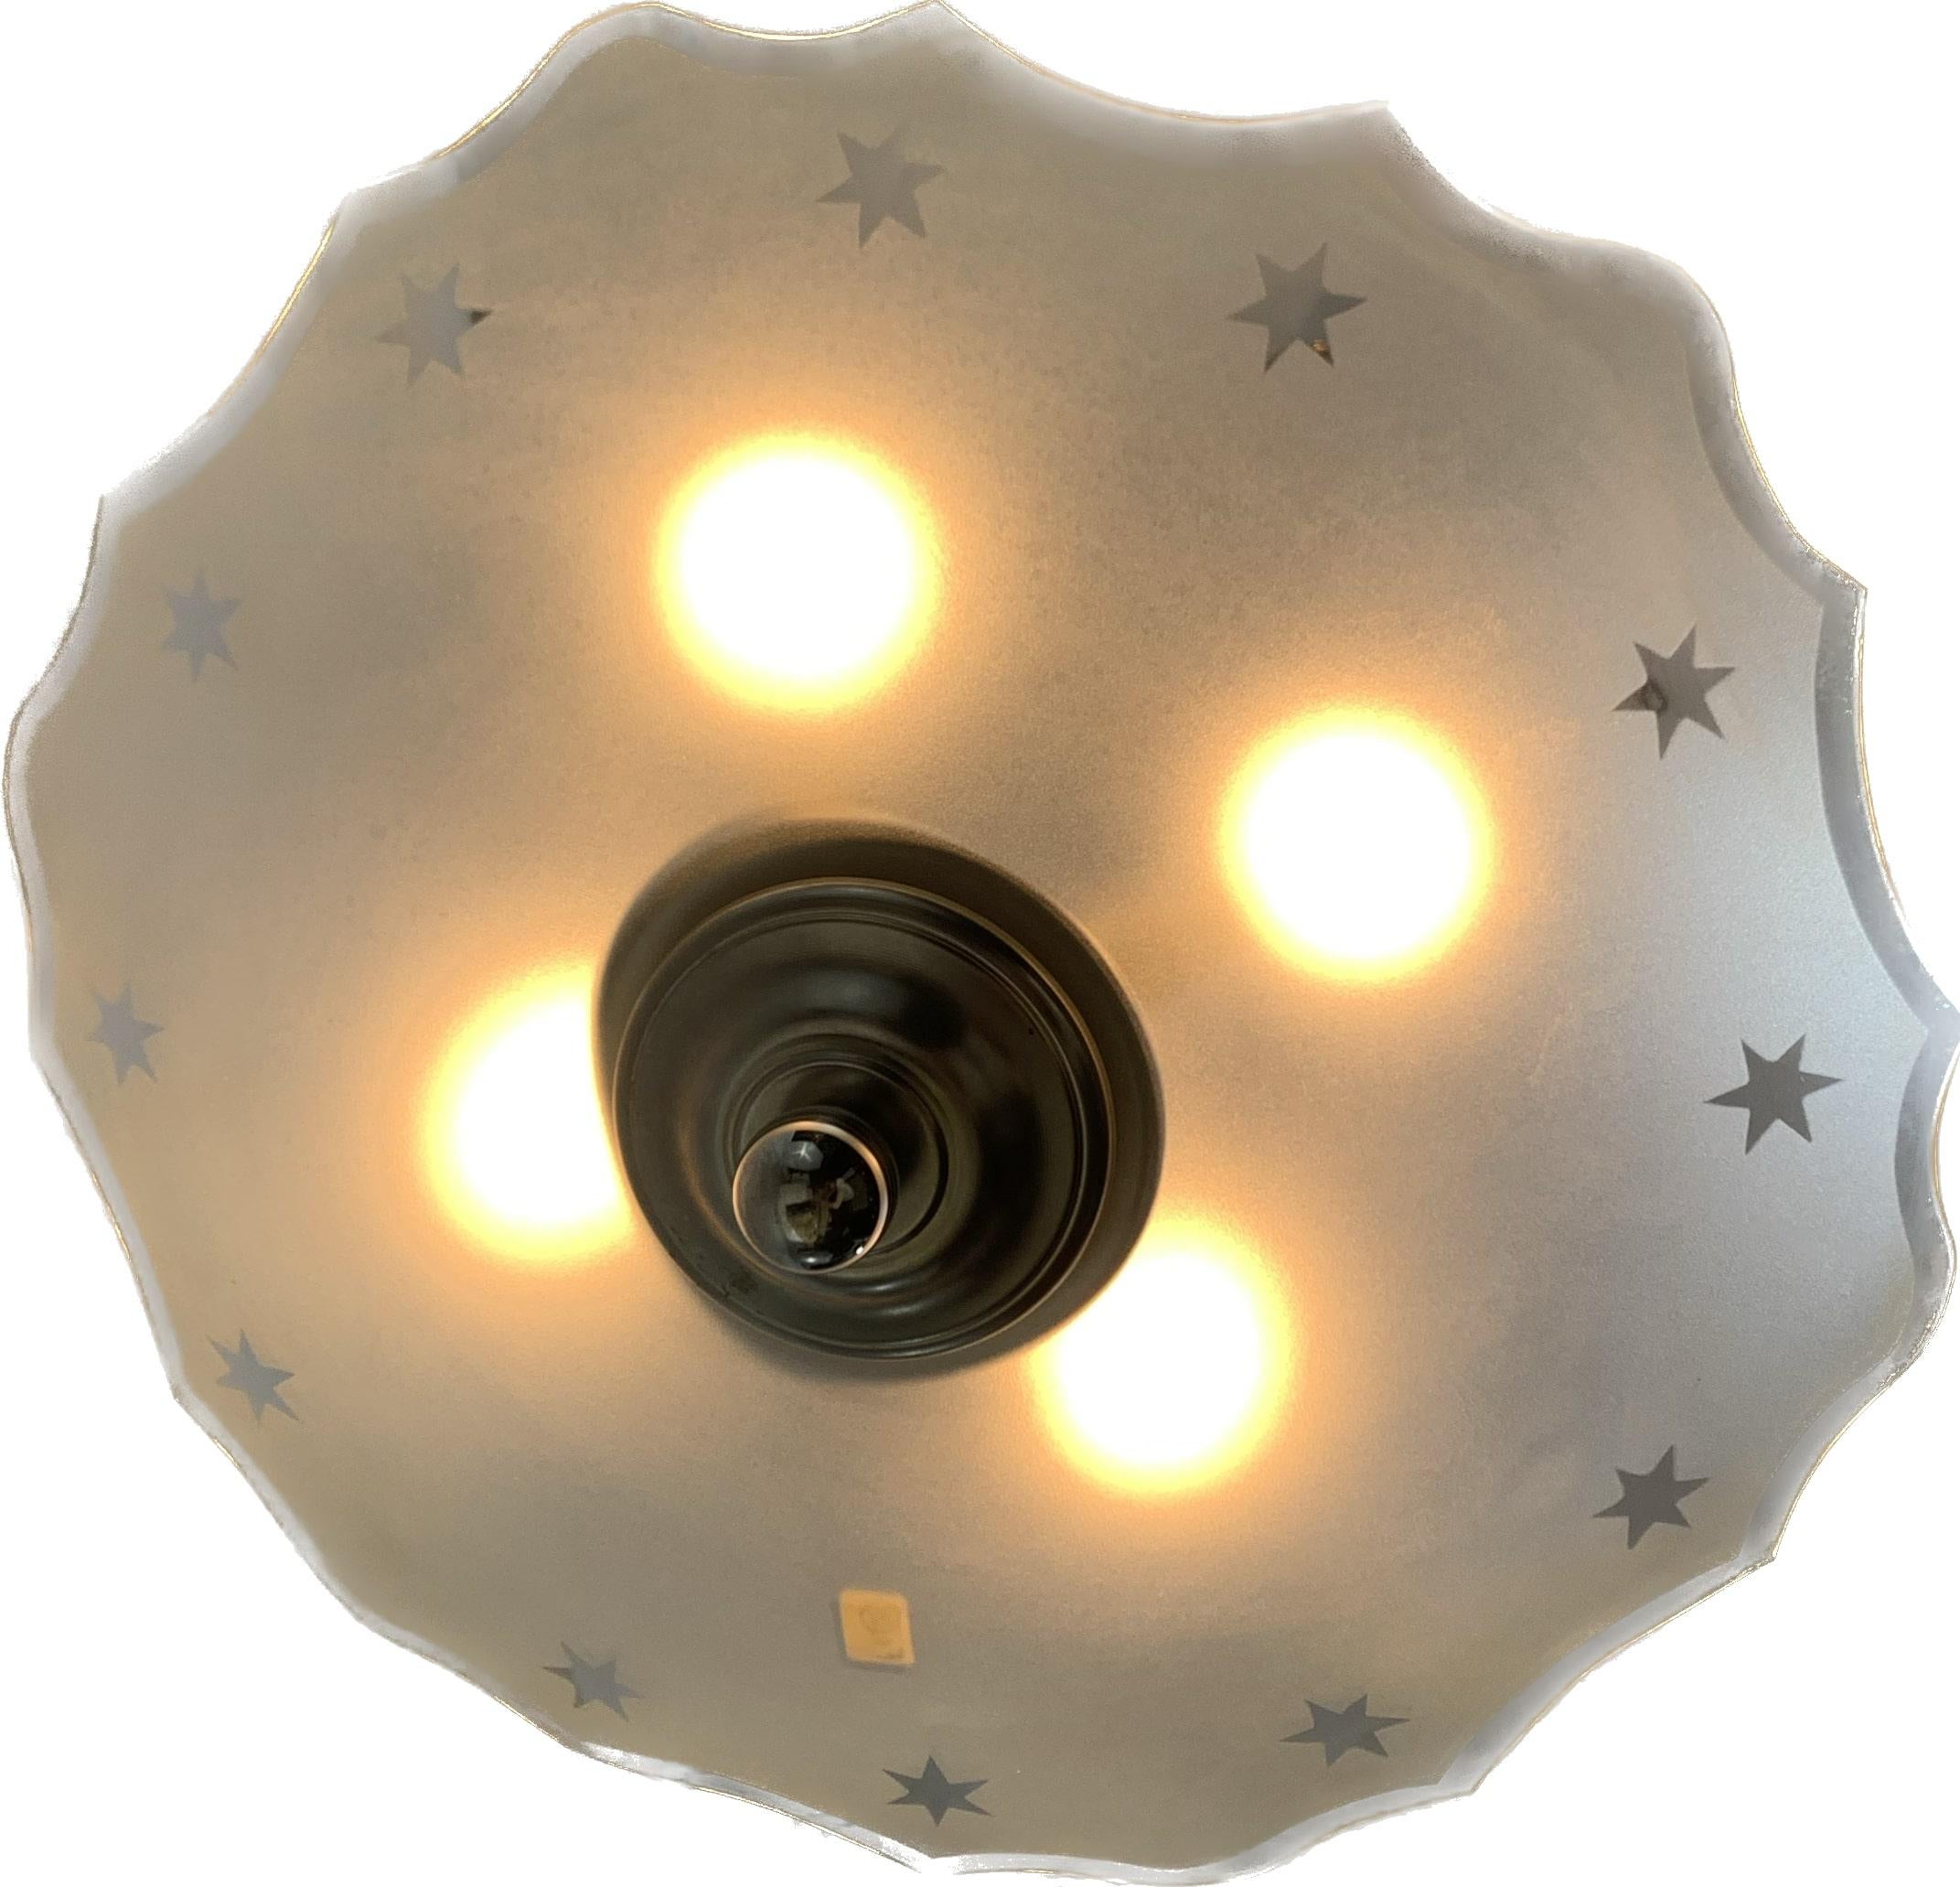 French Art Deco modernist pendant light. White glass shade in semi curved lines around the edge decorated with stars.